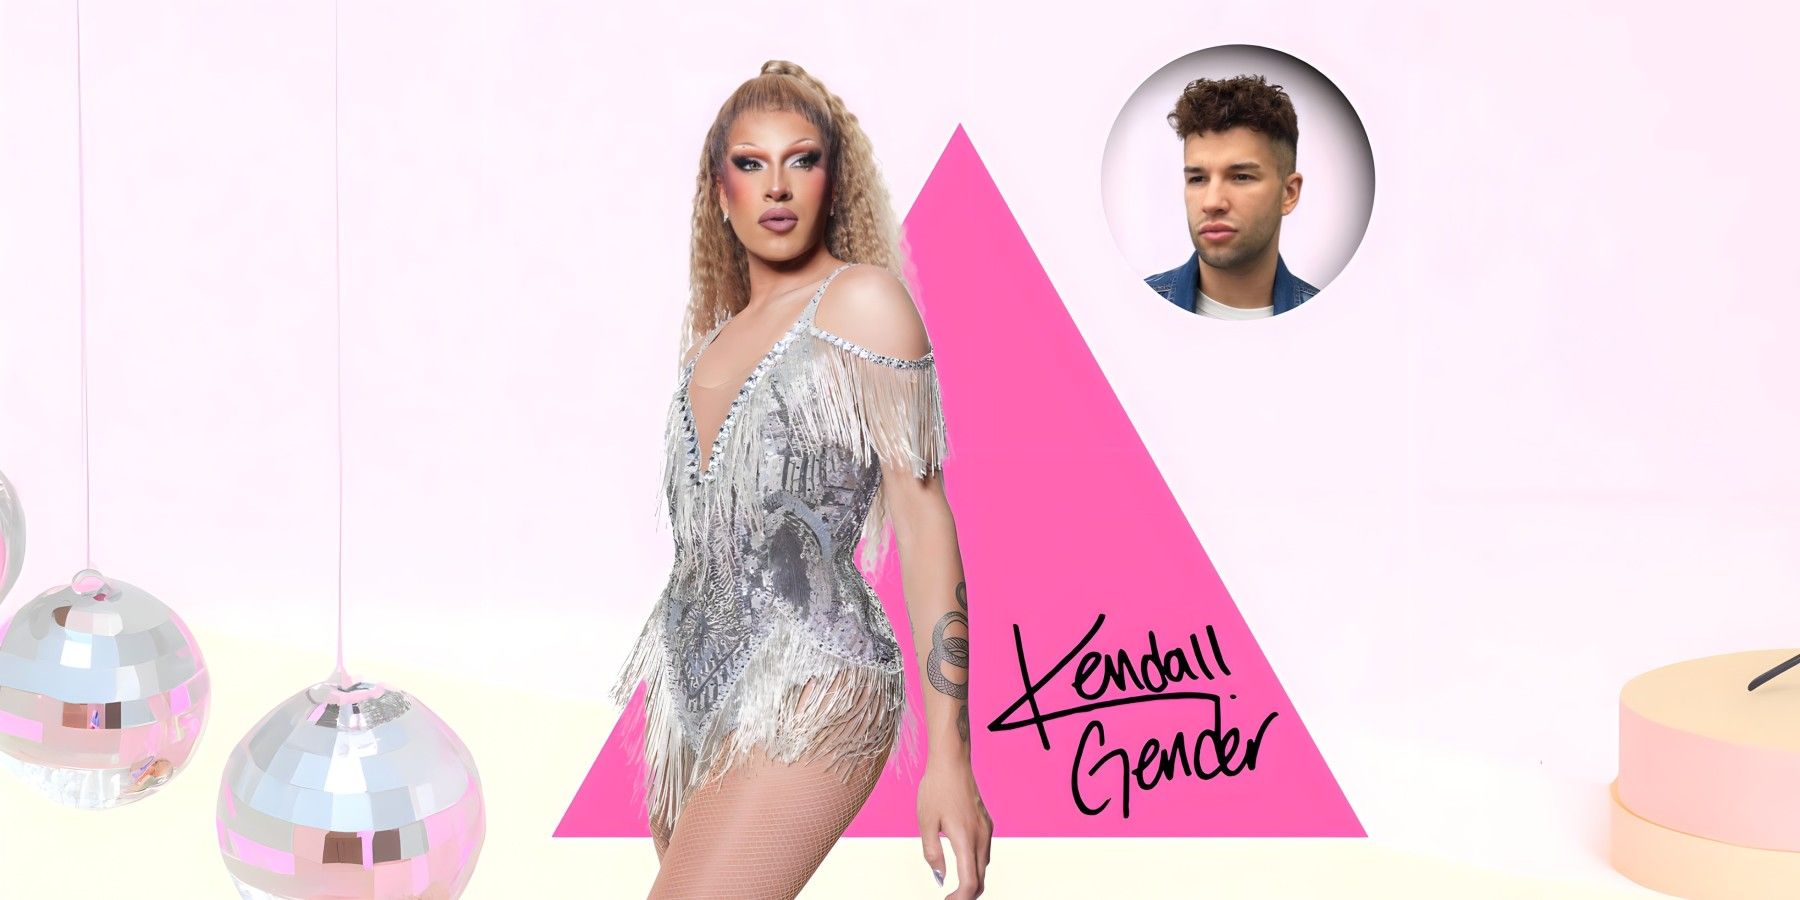 kendall gender in silver dress canadas drag race canada vs the world CROPPED